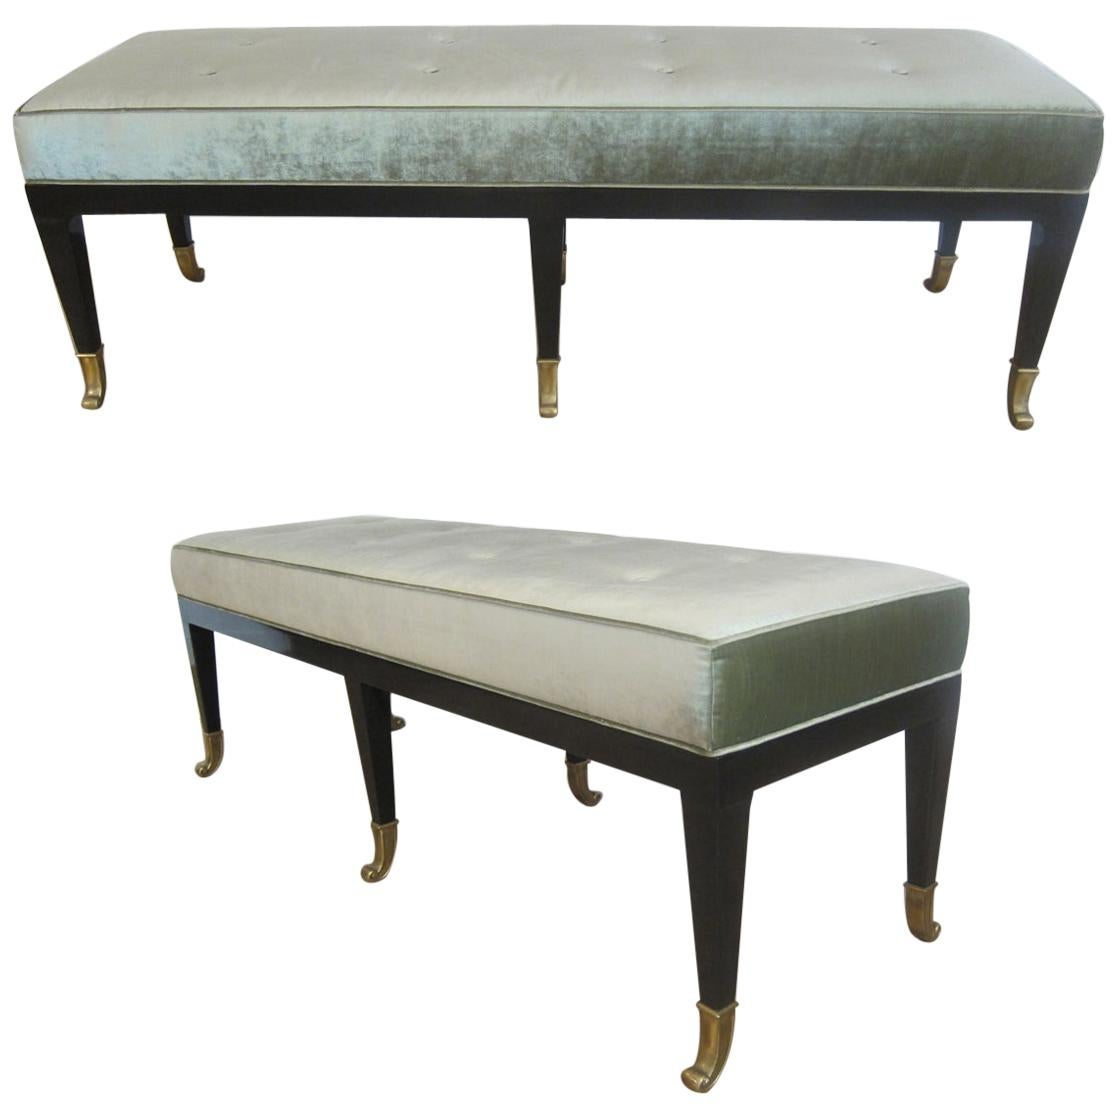 Pair of Large Neoclassical Style Upholstered Benches